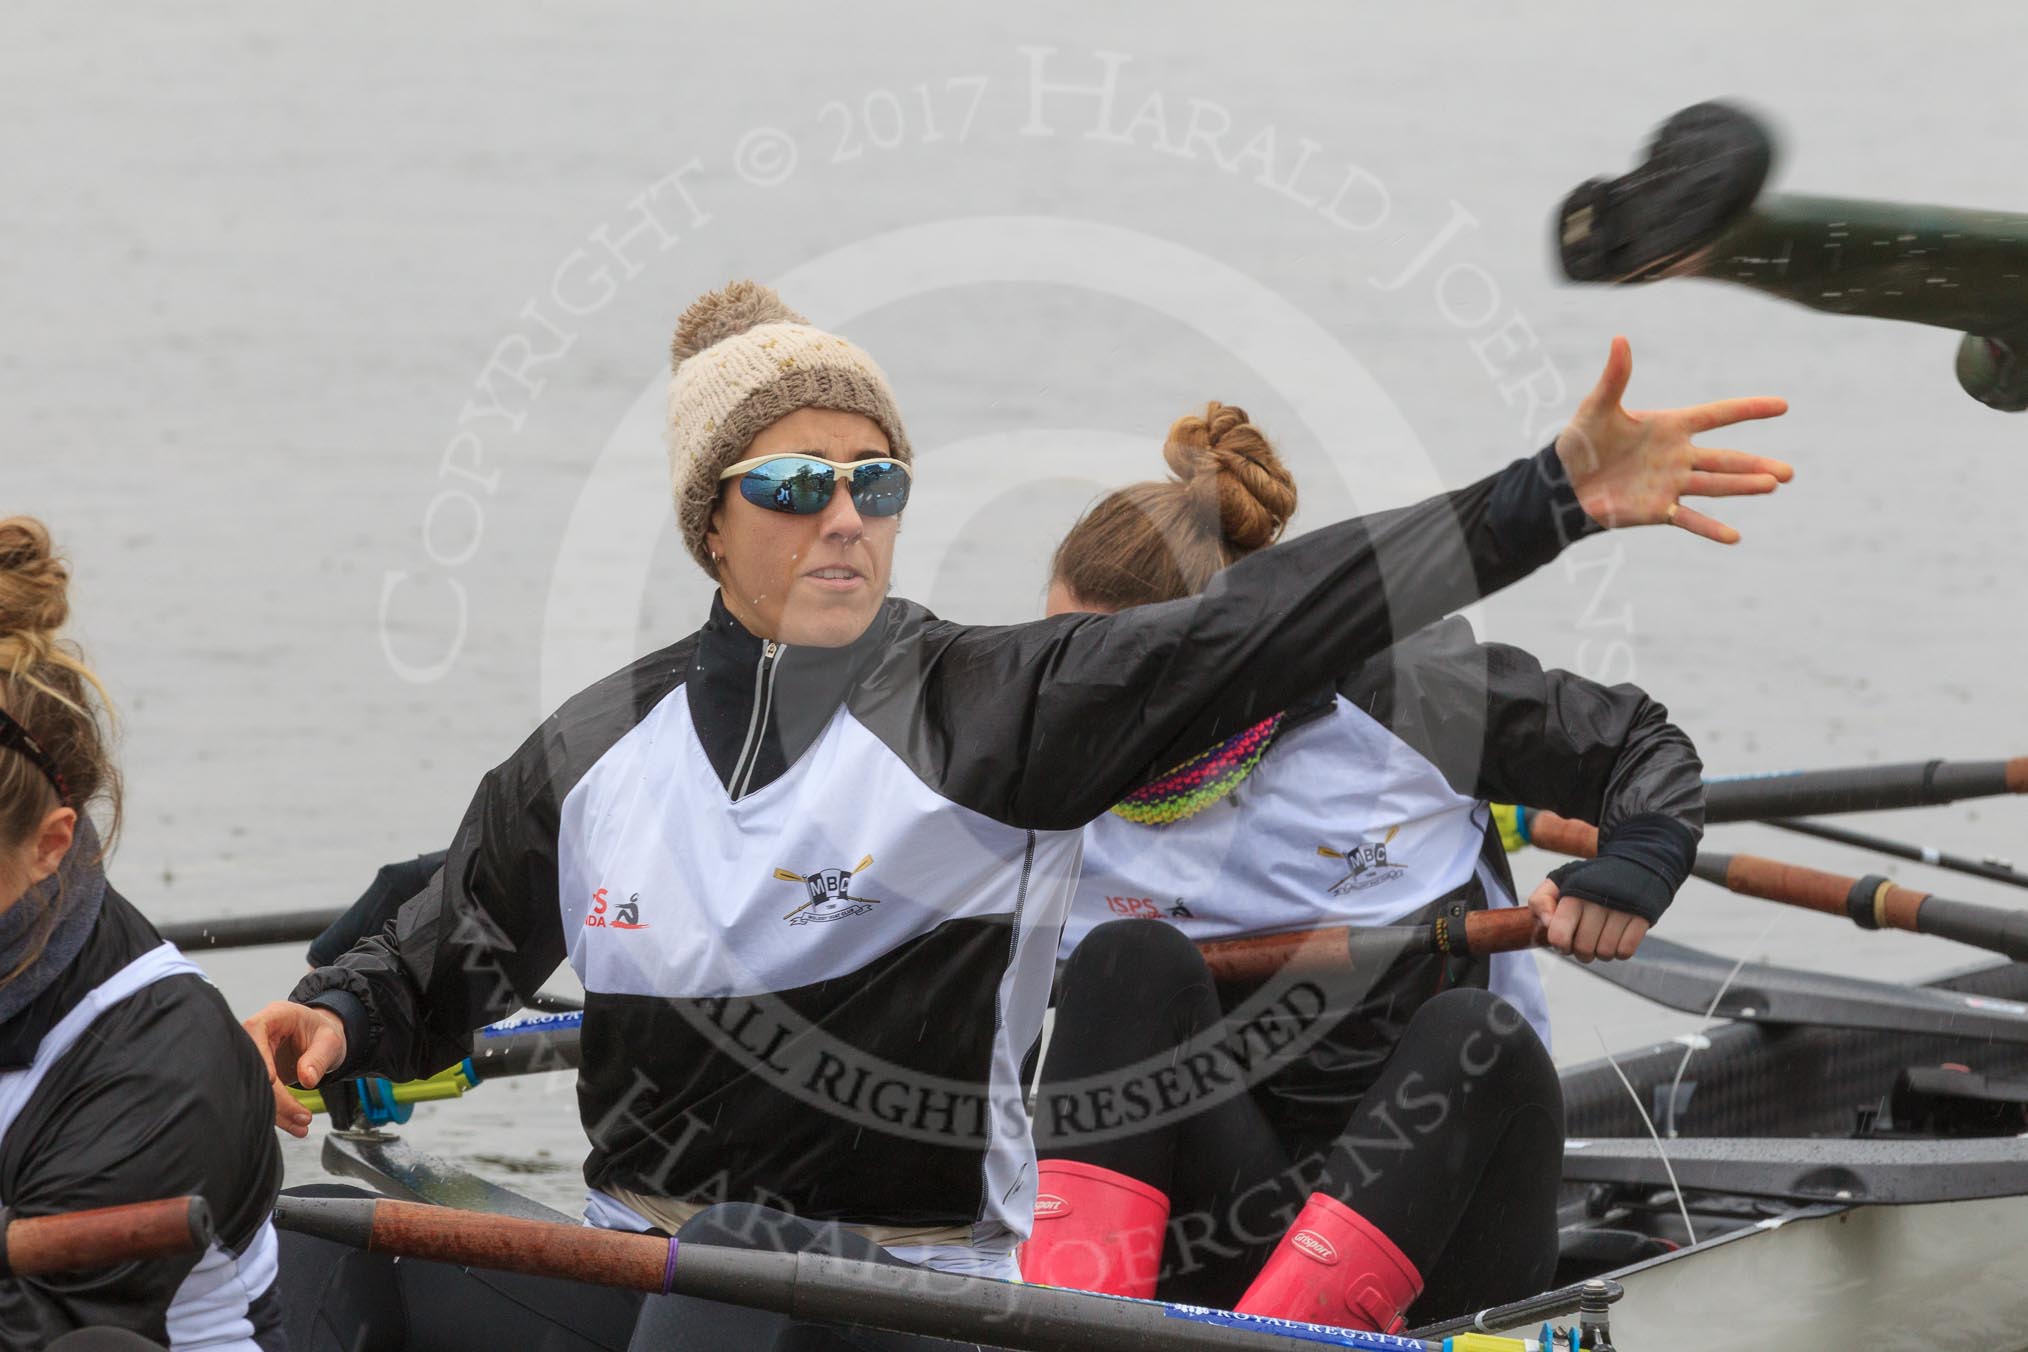 The Women's Boat Race season 2018 - fixture OUWBC vs. Molesey BC: Molesey's 6 seat Molly Harding, 5 seat Ruth Whyman, and 4 Claire McKeown.
River Thames between Putney Bridge and Mortlake,
London SW15,

United Kingdom,
on 04 March 2018 at 13:09, image #12